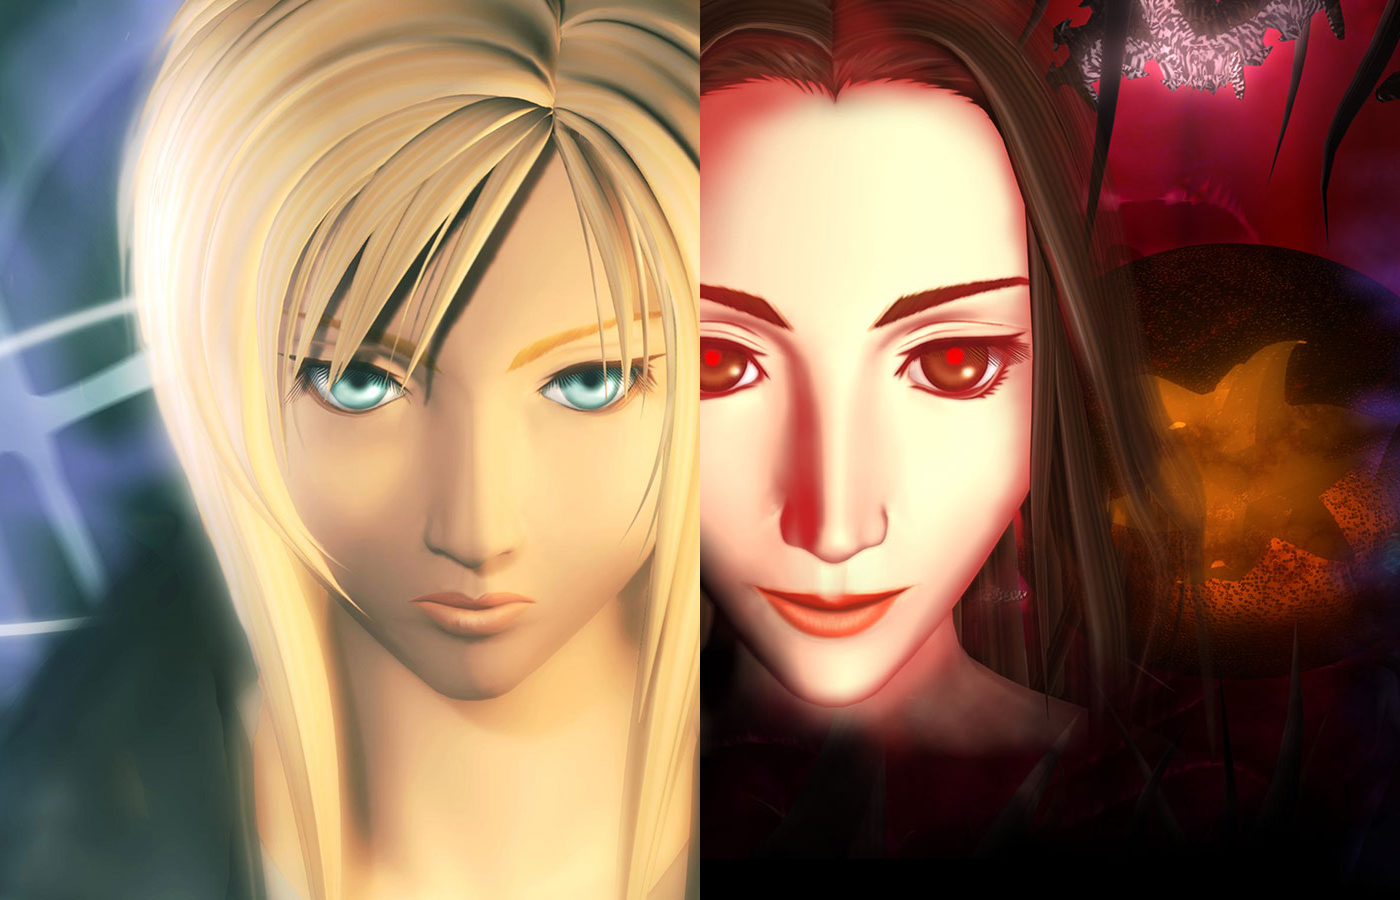 Parasite Eve Trademark Filed By Square Enix In The UK –